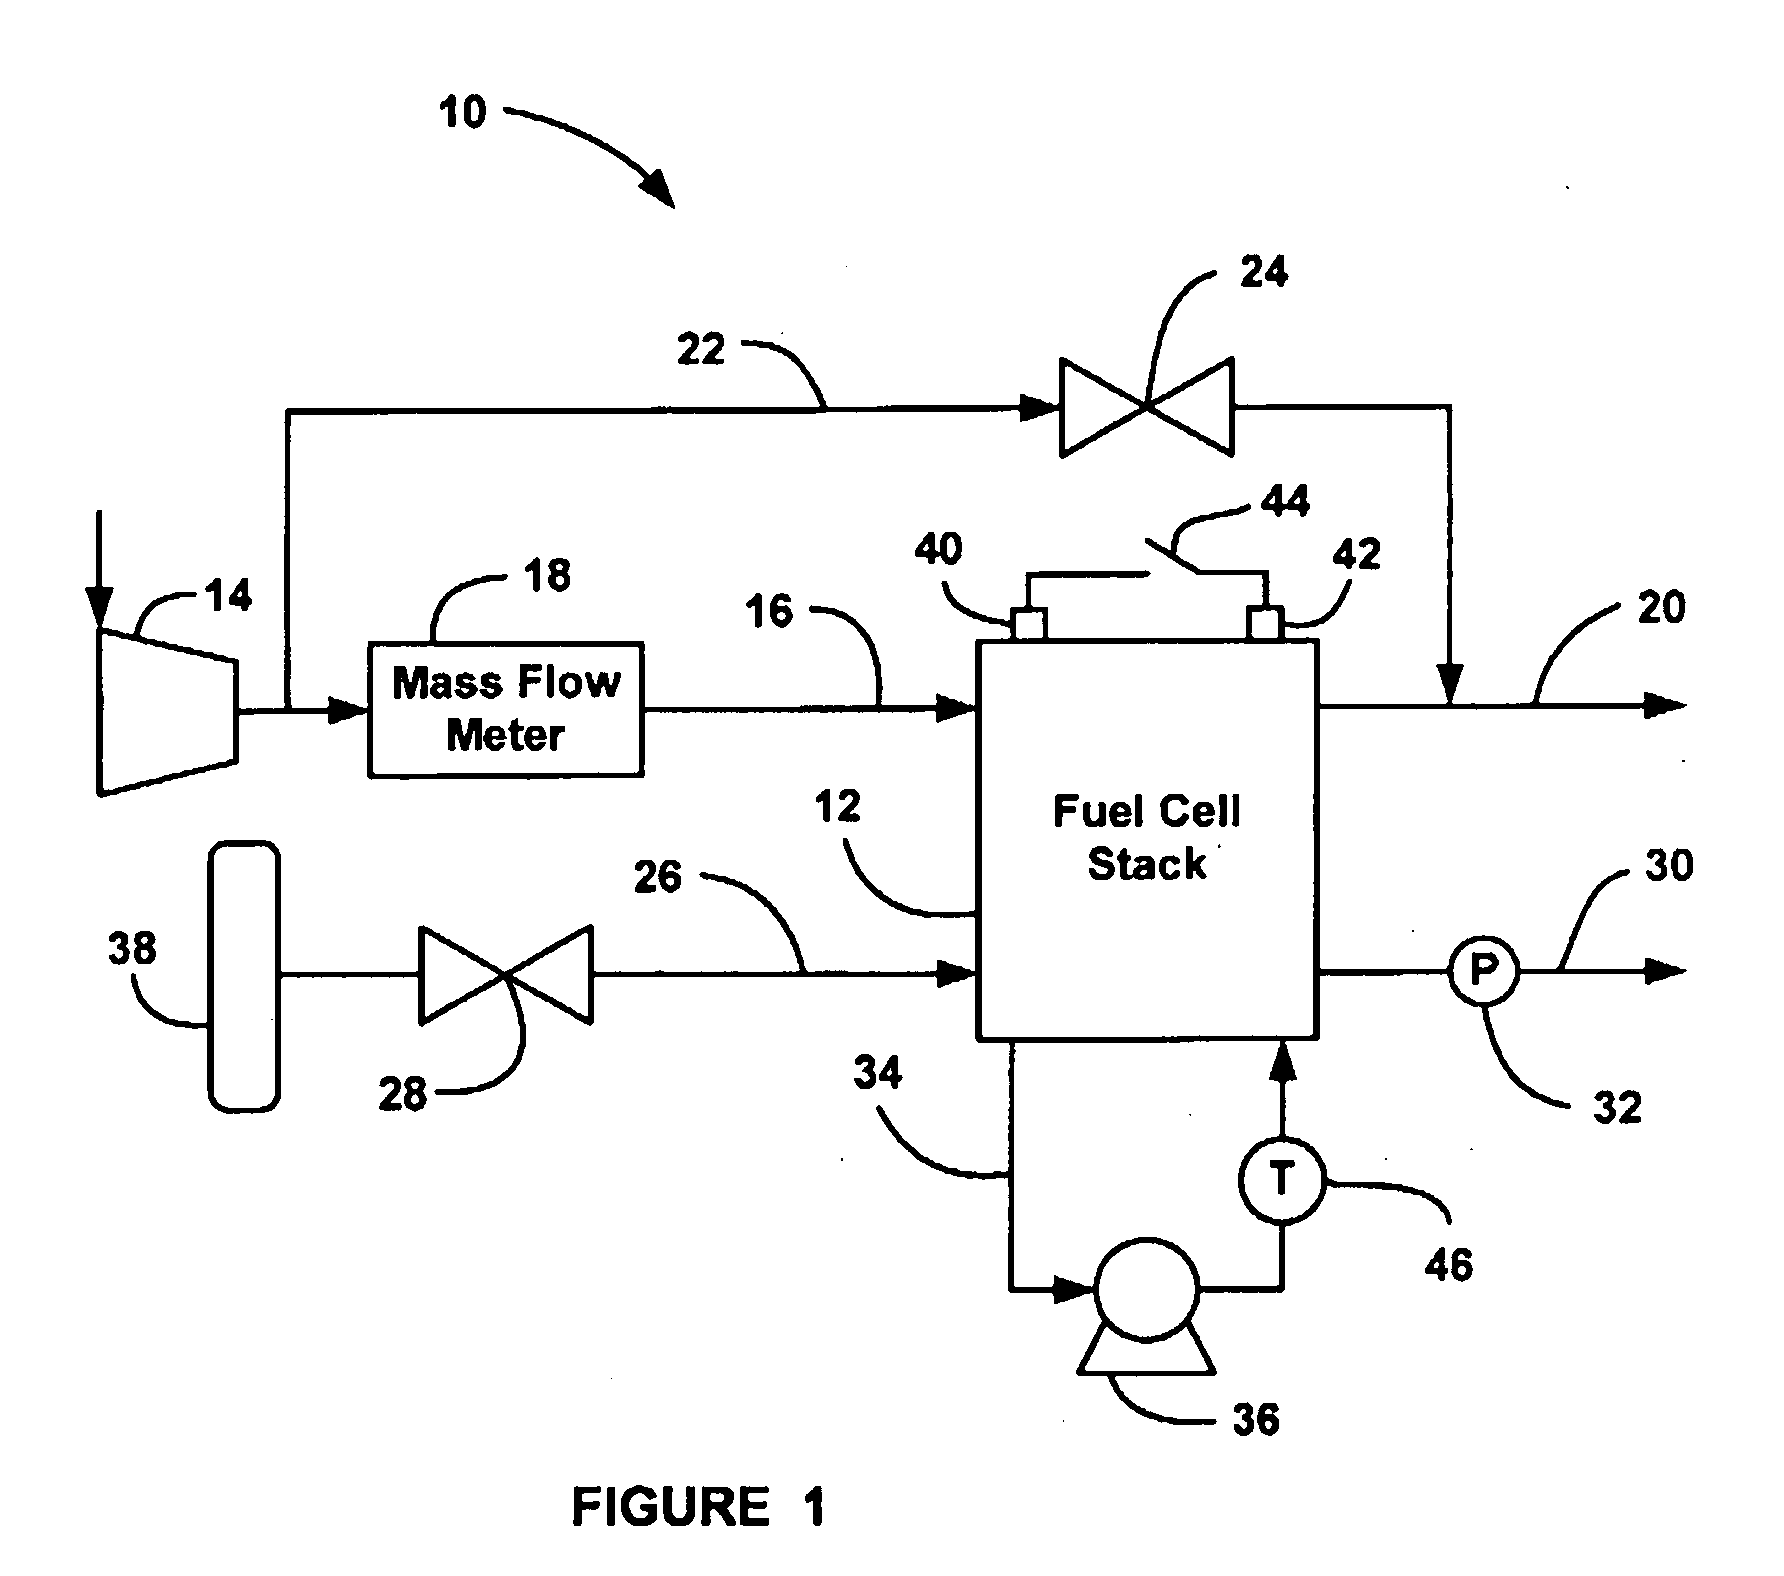 Fuel cell stack used as coolant heater